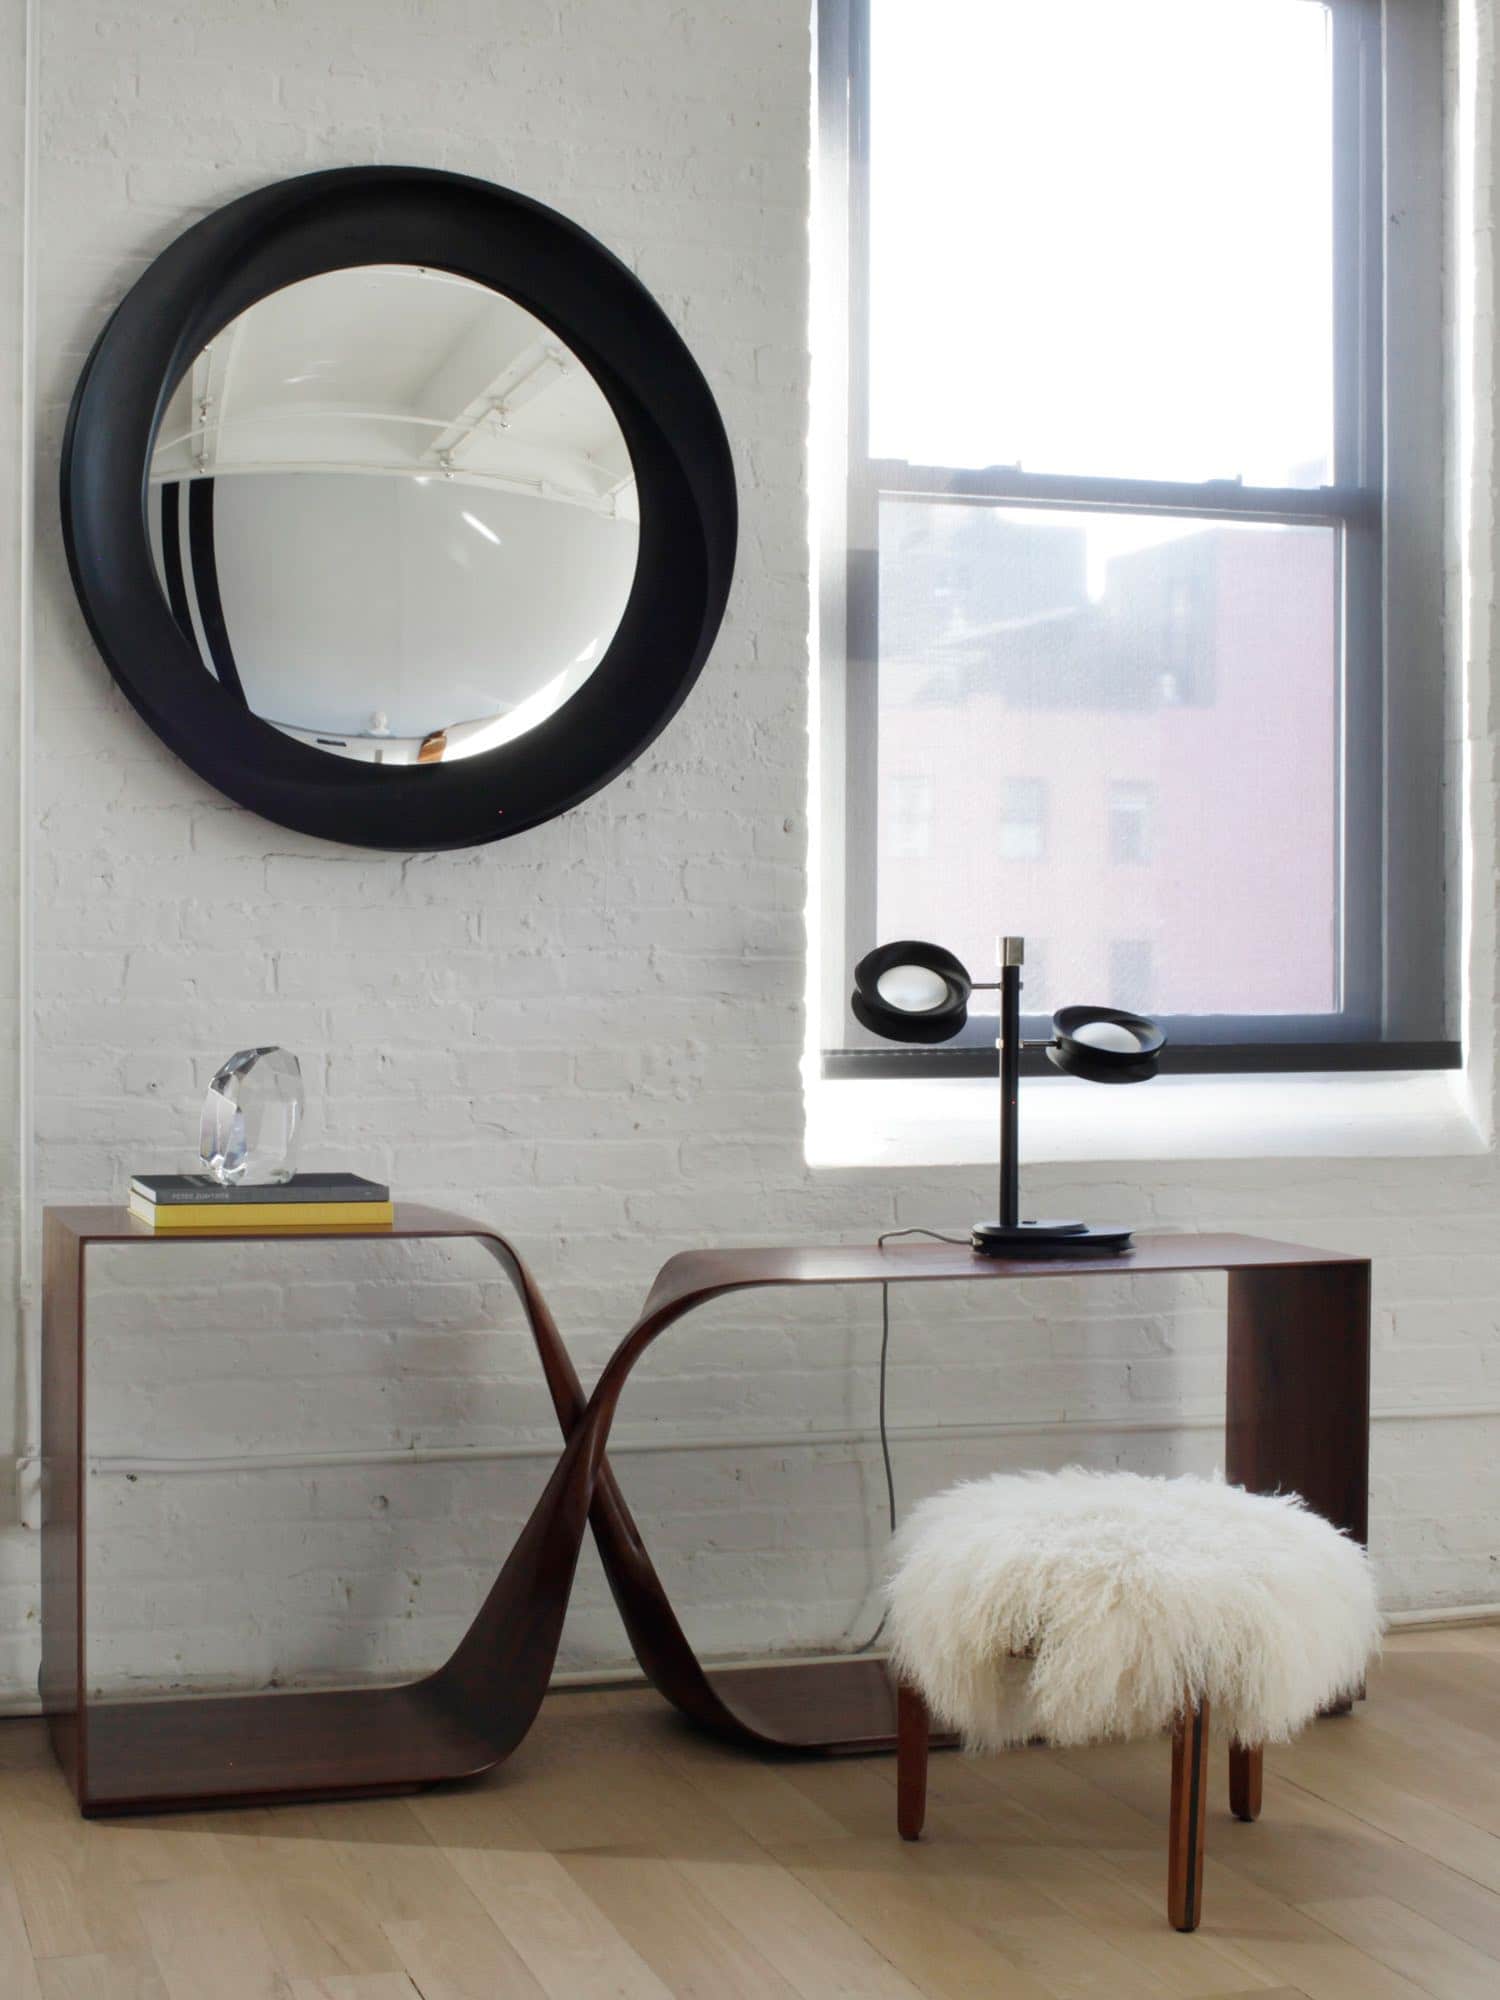 This image shows a CE10 mirror in ebonized mahogany with a convex mirror designed by Carol Egan.  The mirror is wall-mounted with a diameter of 39.5" (100cm). Shown here in the image mounted on the wall above a freestanding walnut console.  